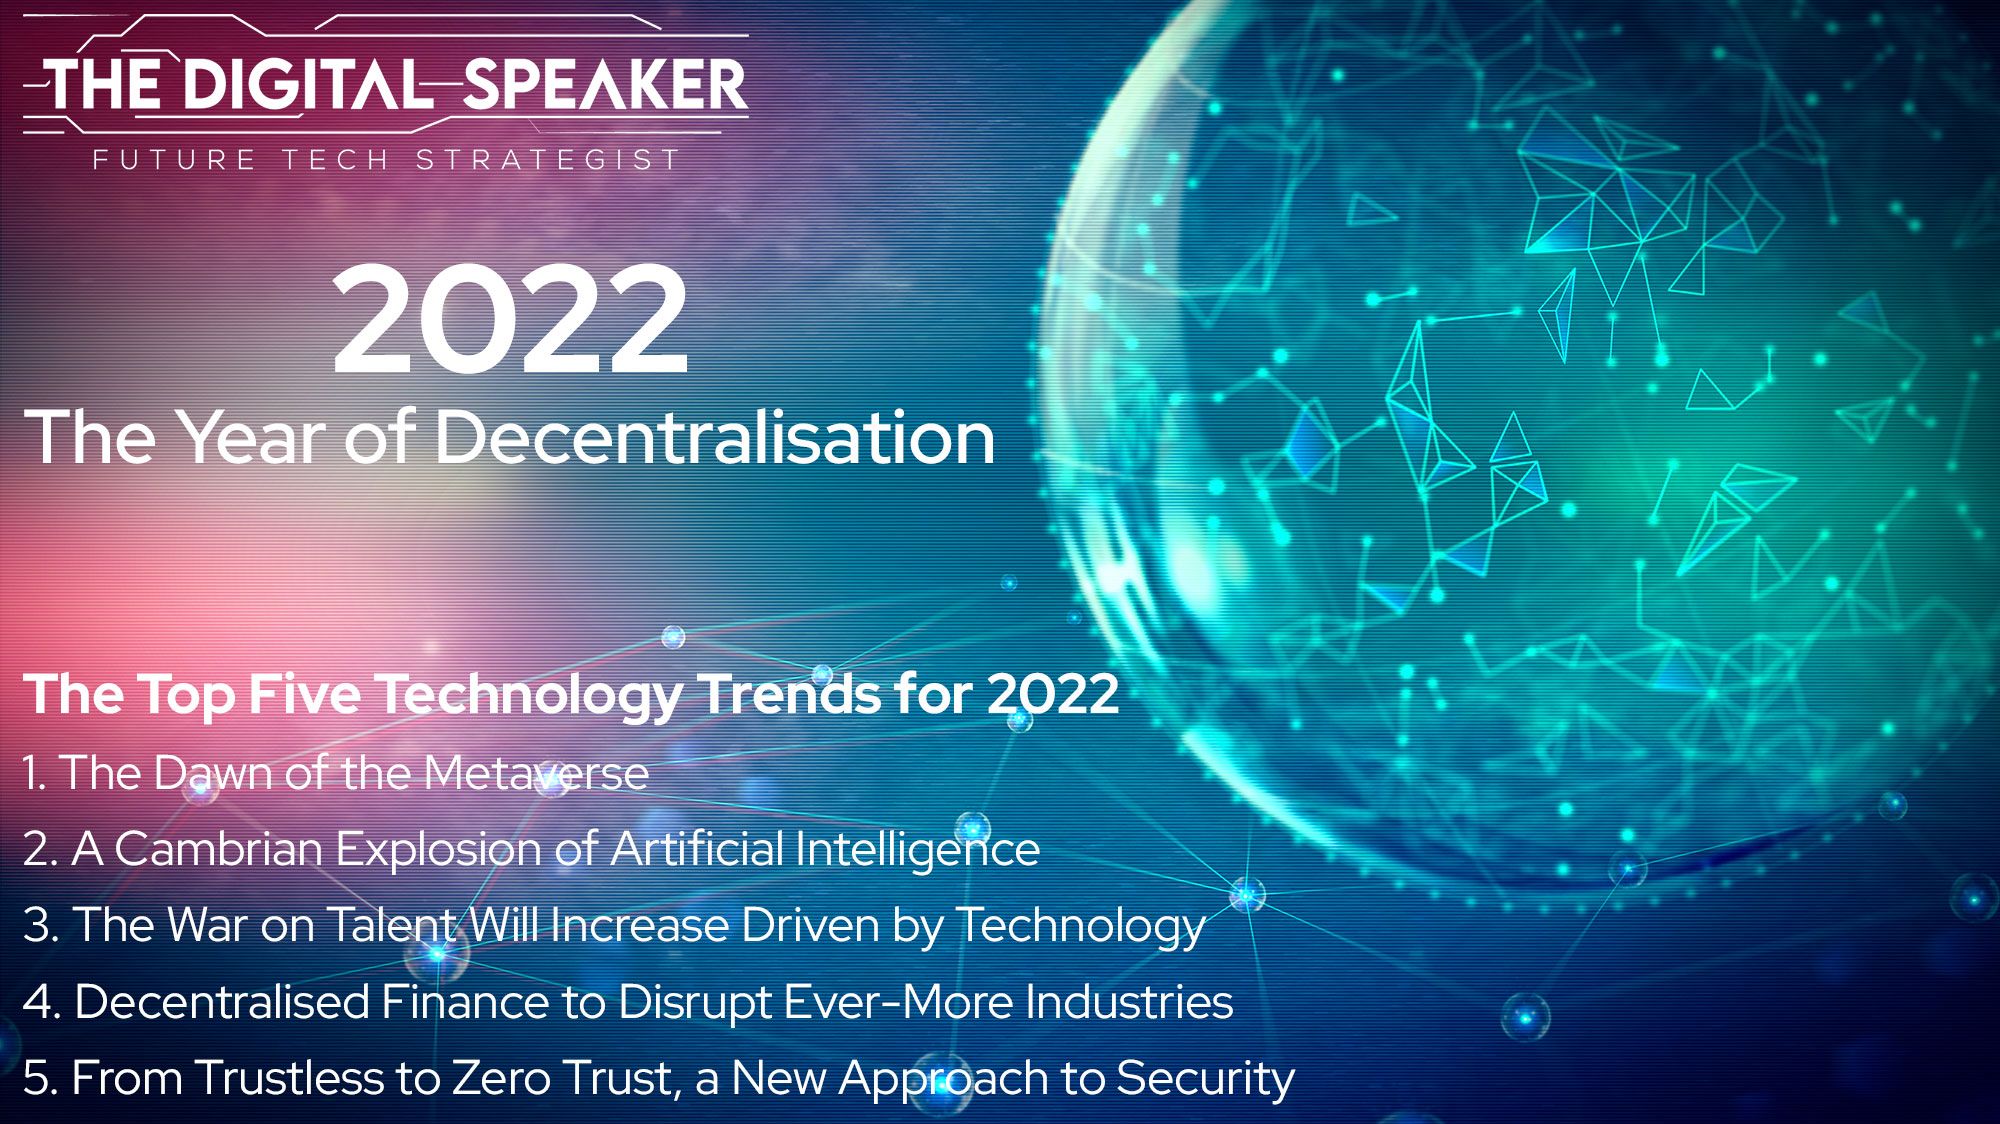 The Top 5 Technology Trends for 2022: The Year of Decentralisation